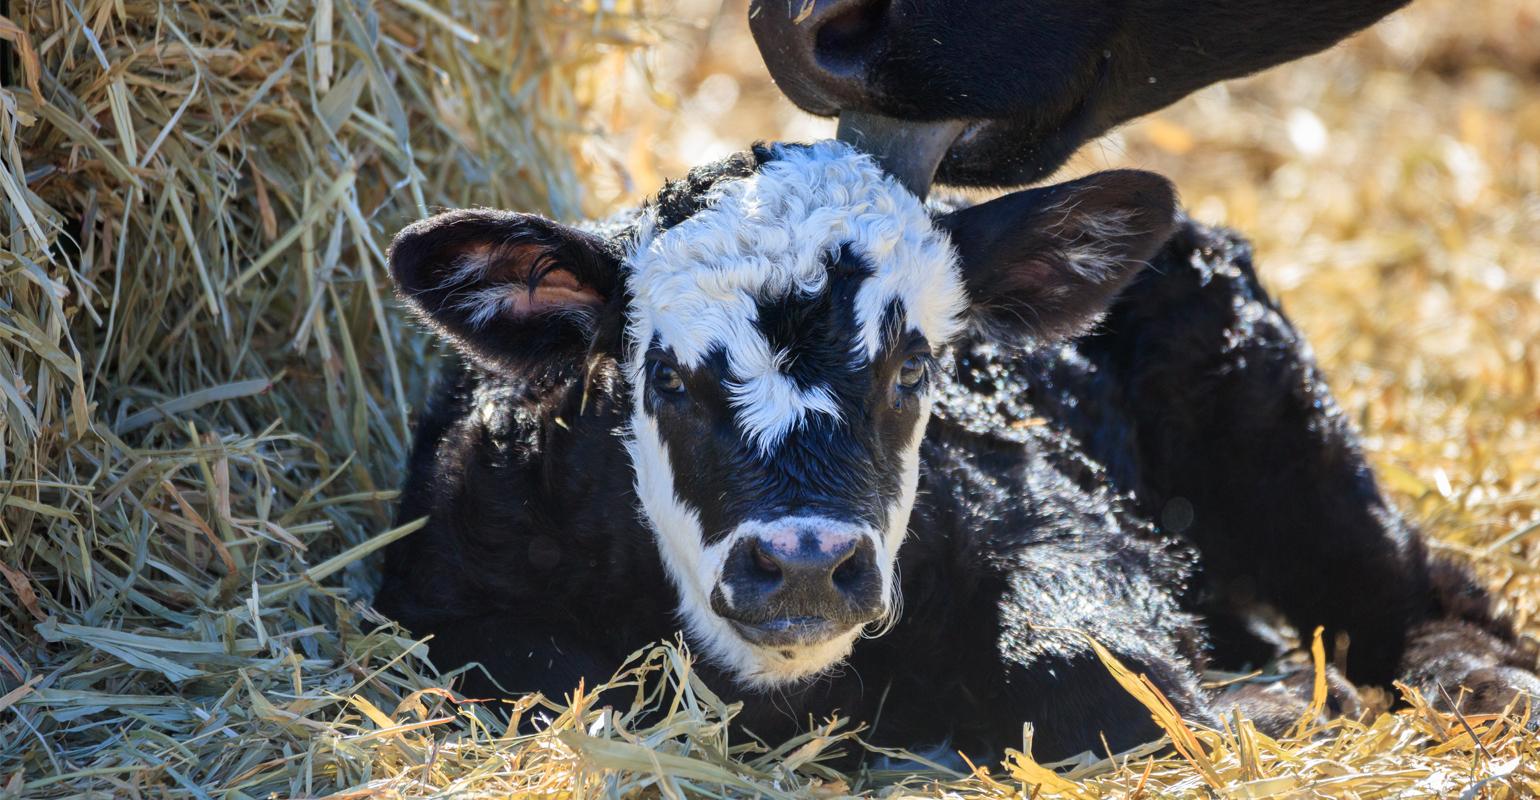 More on Fall Calving Best Practices from Dr. Rosslyn Biggs